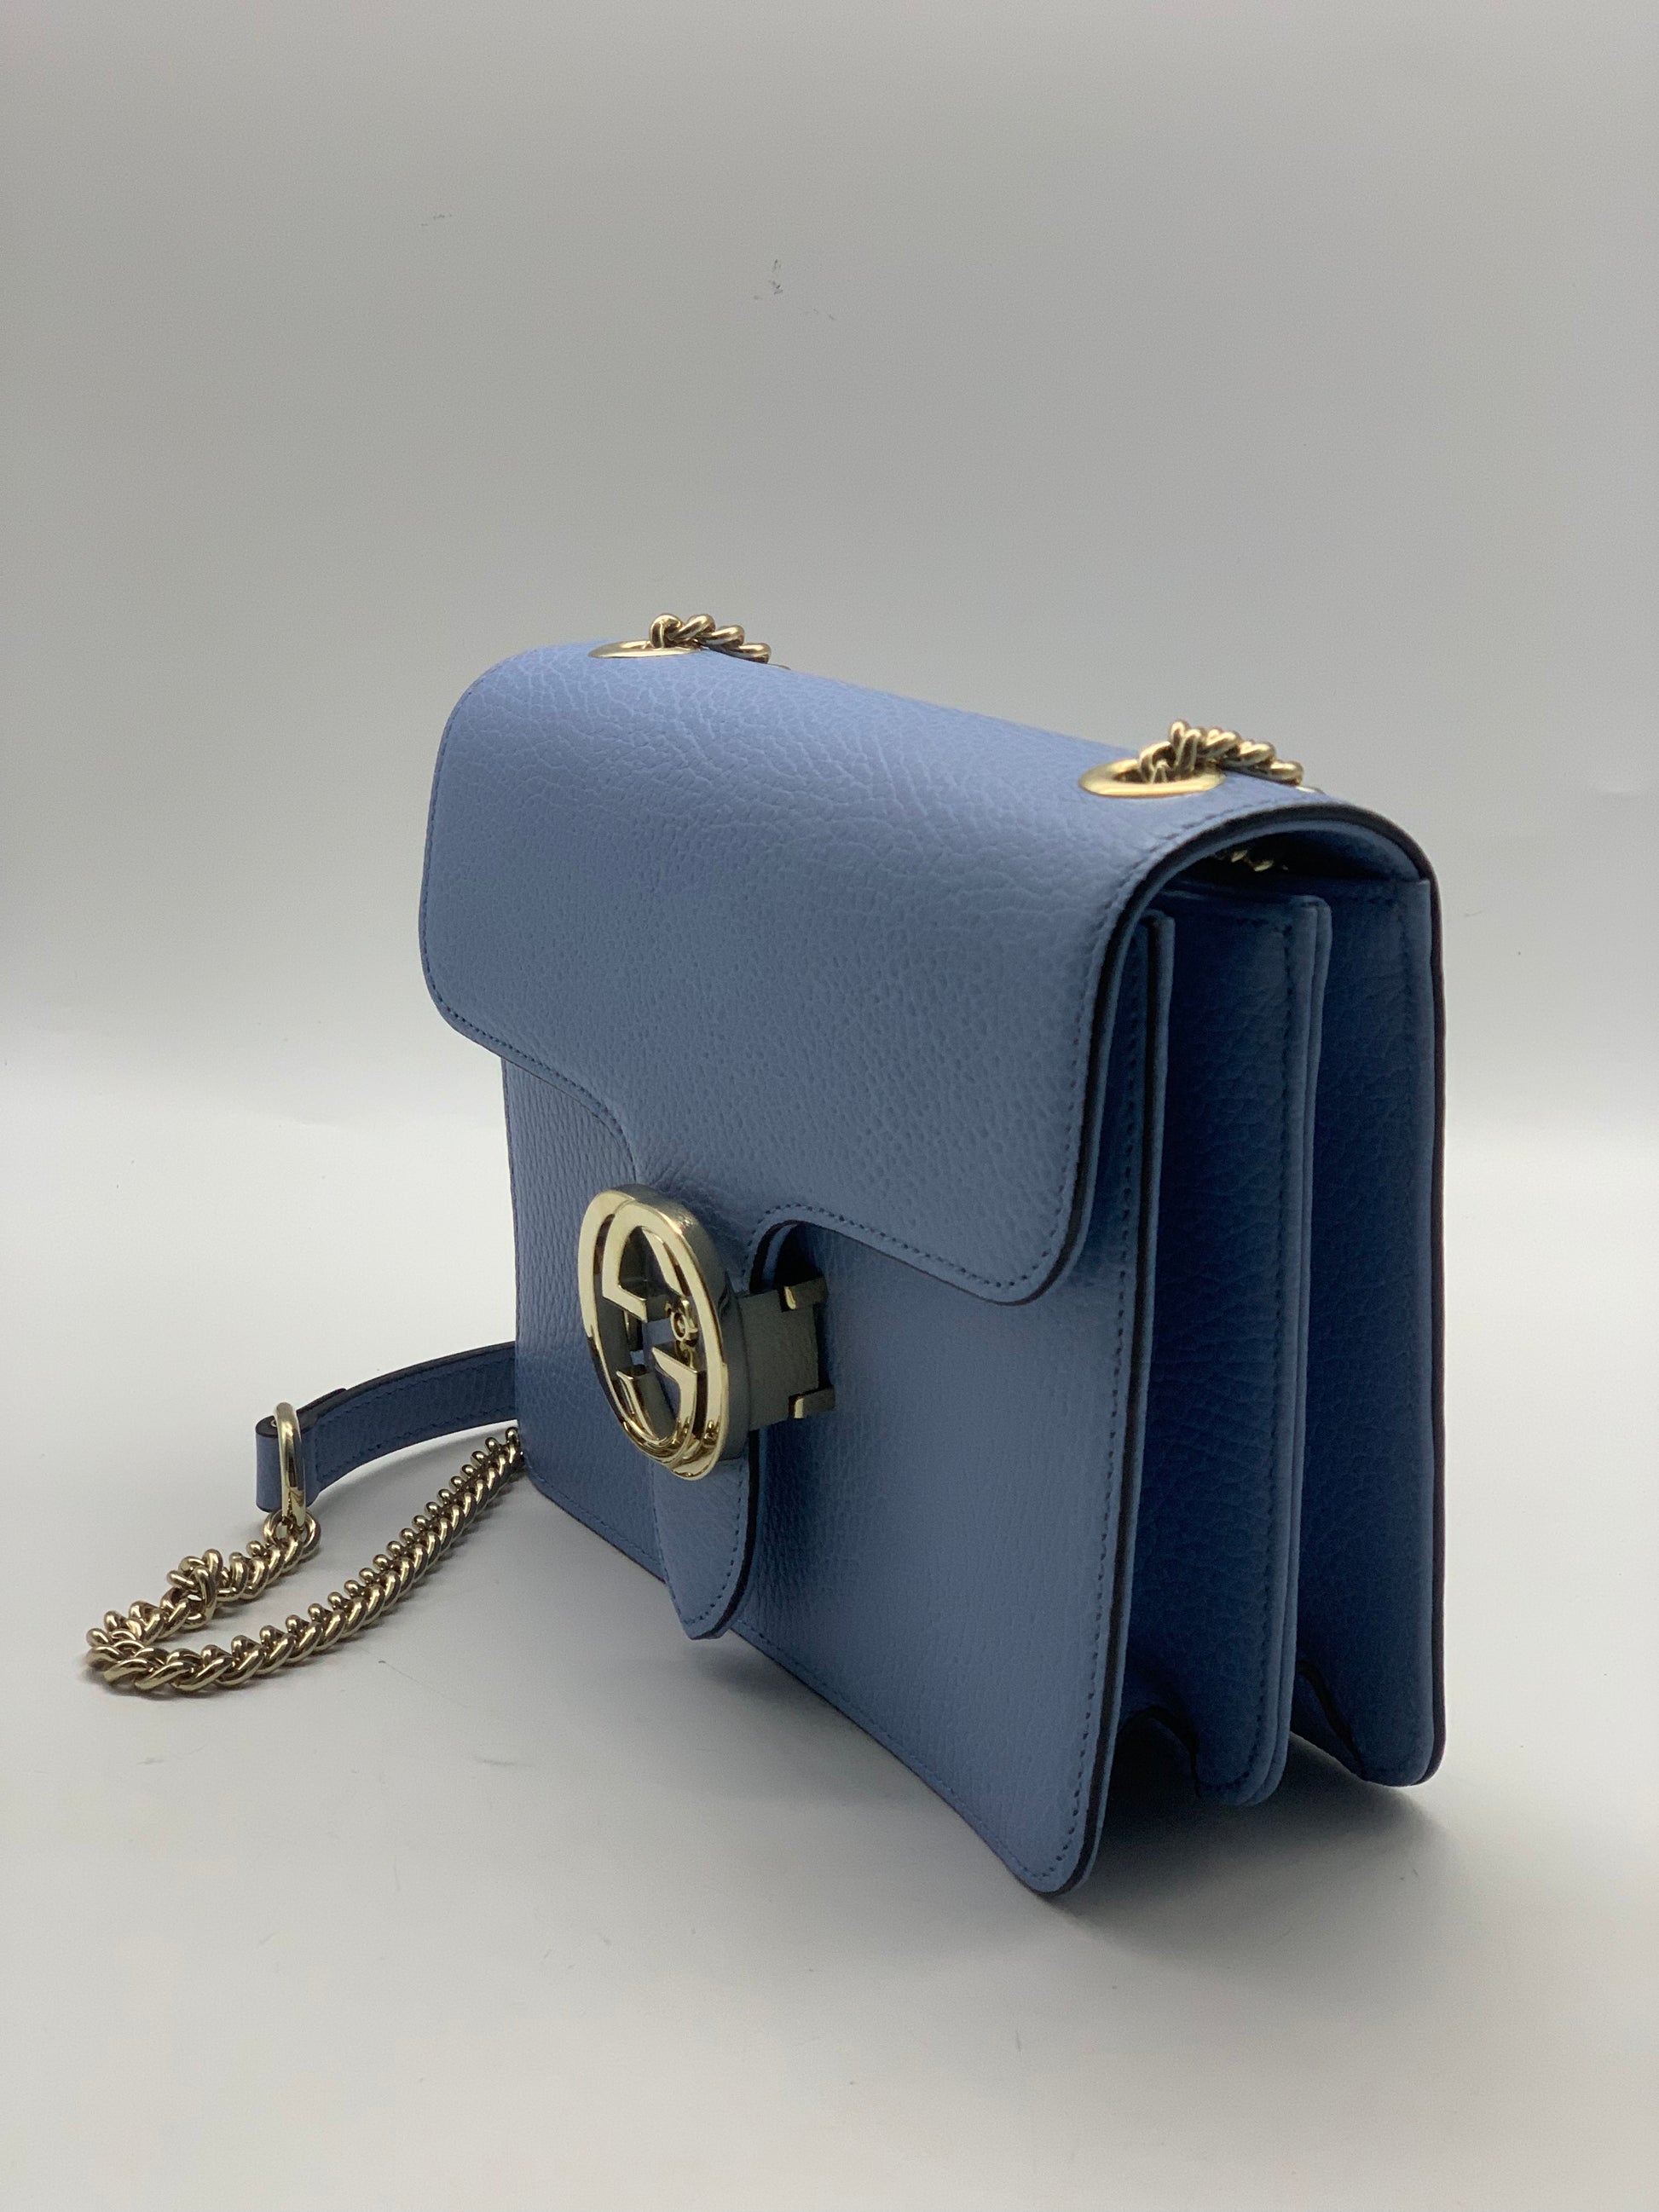 Gucci Interlocking G Small Leather Shoulder Bag in Blue